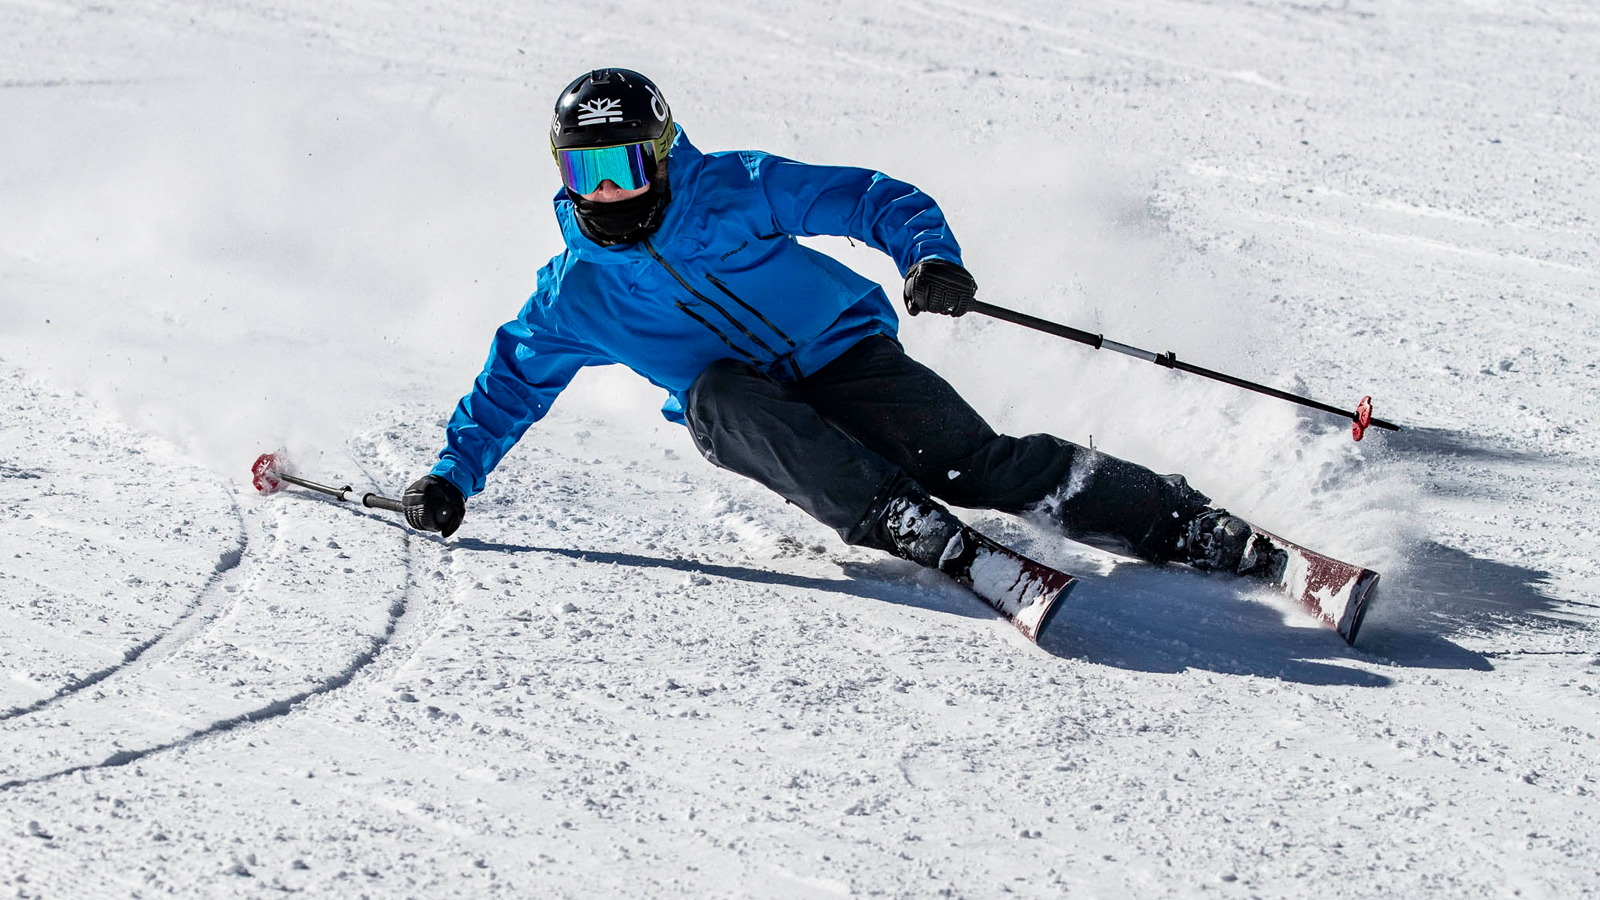 This new product is the ultimate knee protection for skiers - FREESKIER